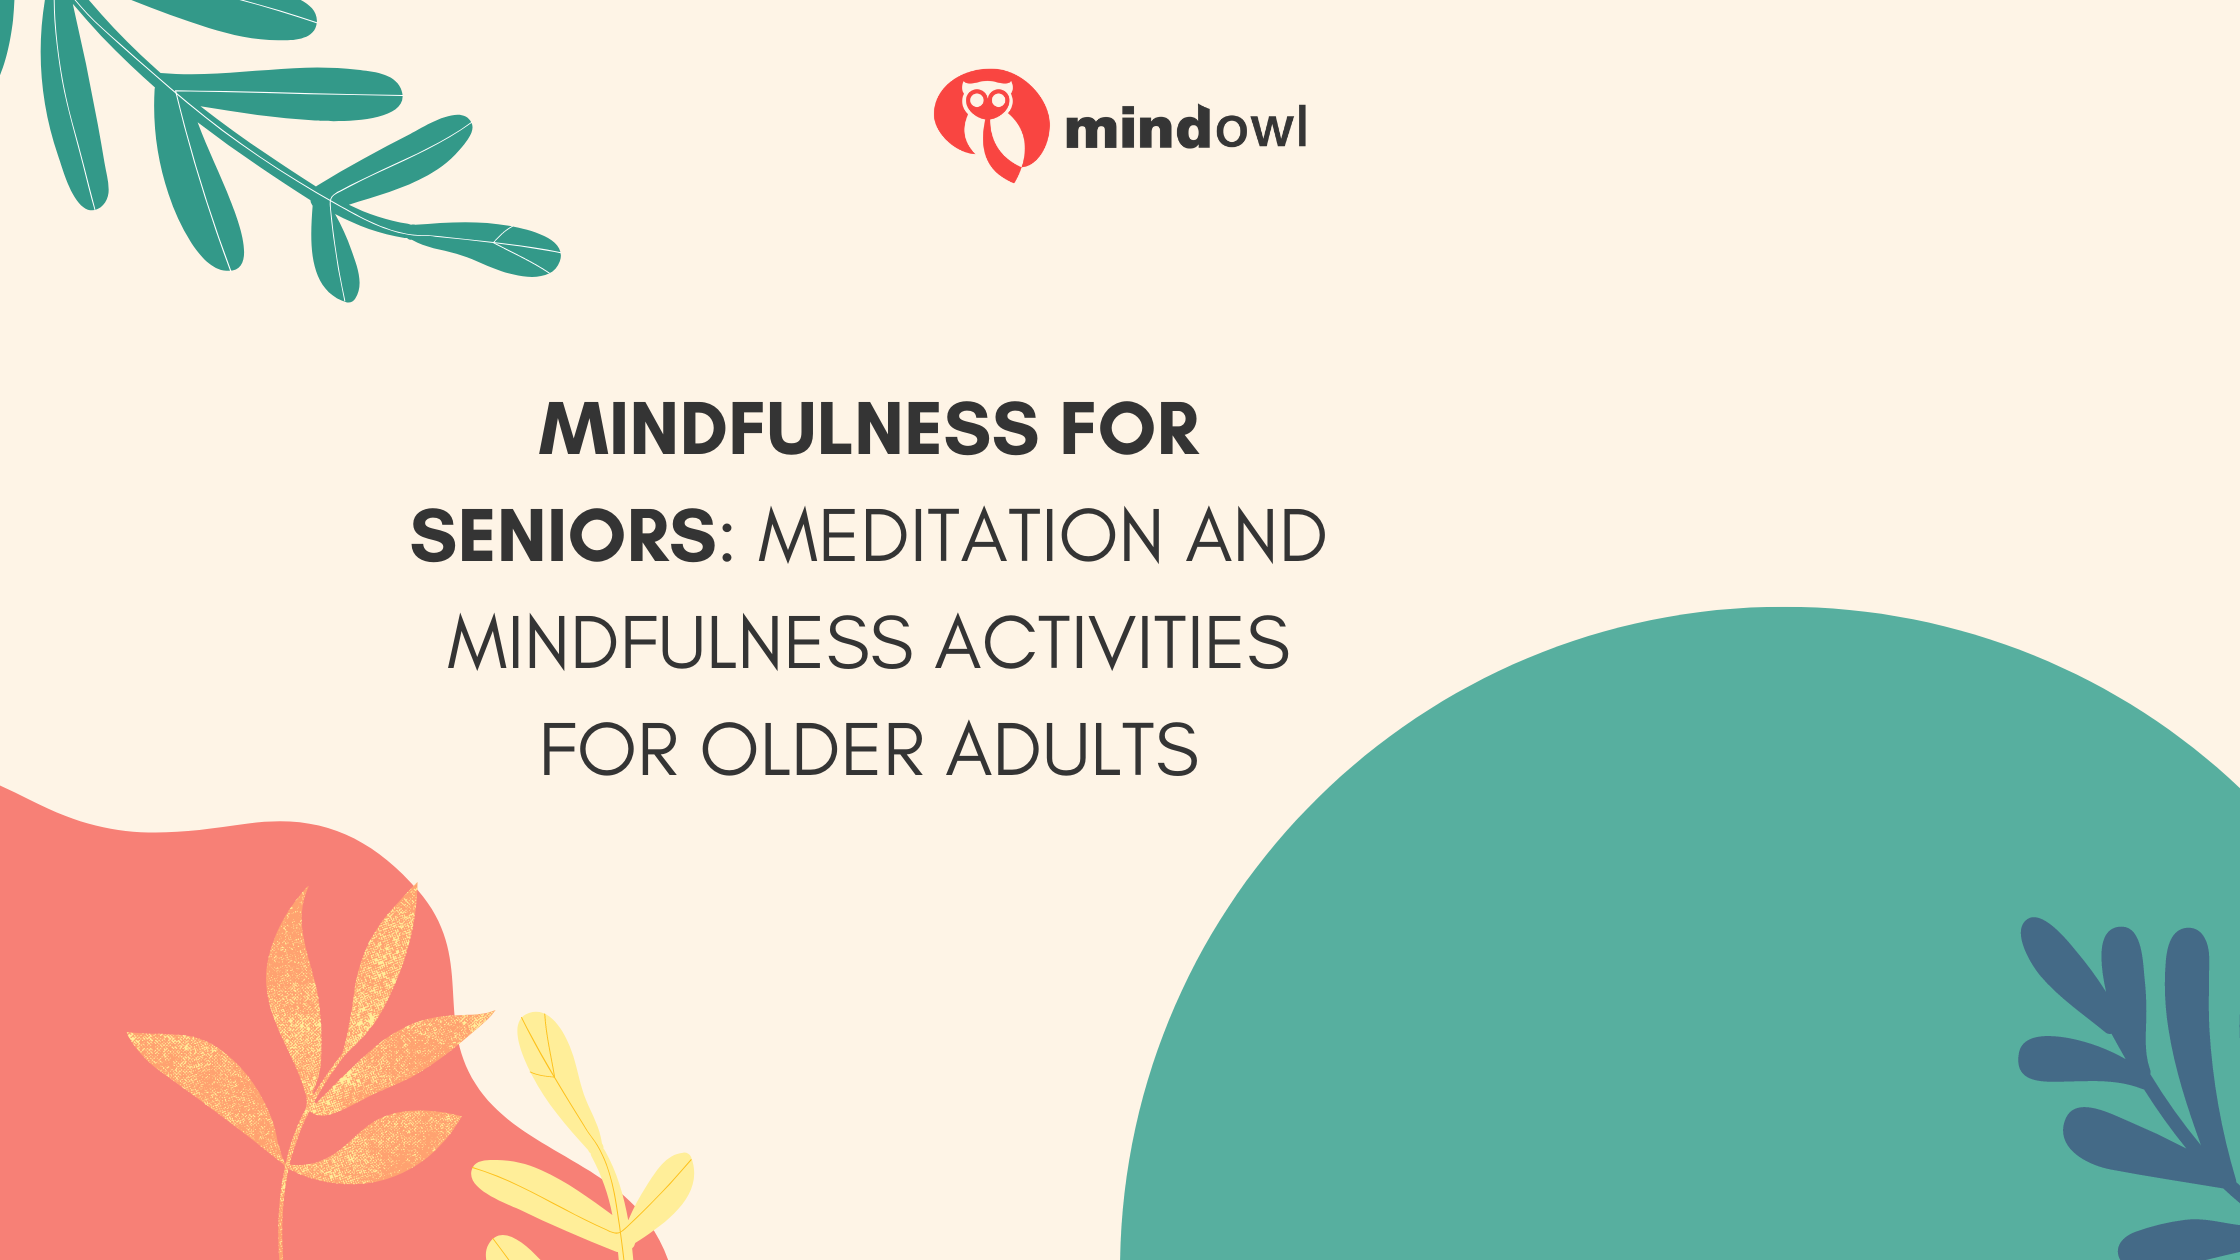 Mindfulness For Seniors: Meditation And Mindfulness Activities For Older Adults